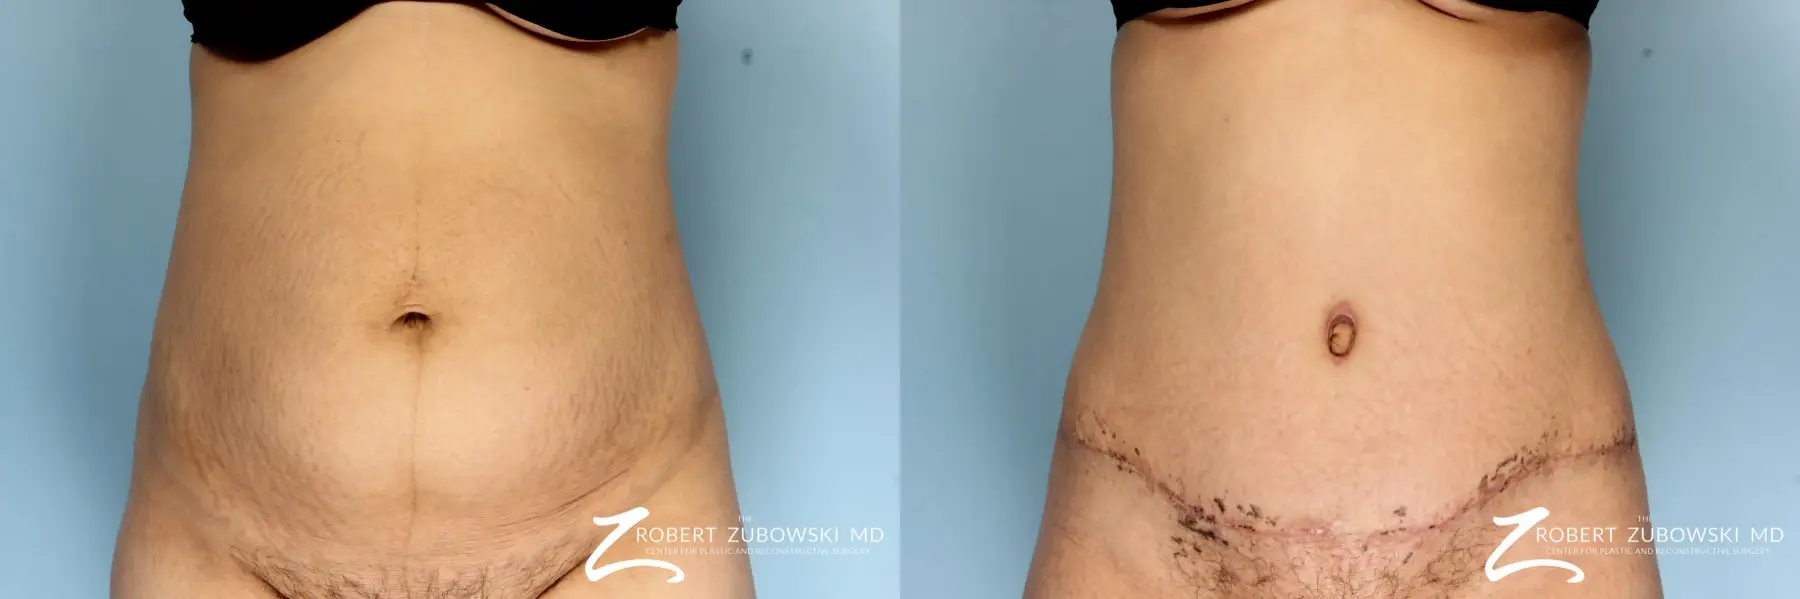 Liposuction: Patient 28 - Before and After 1